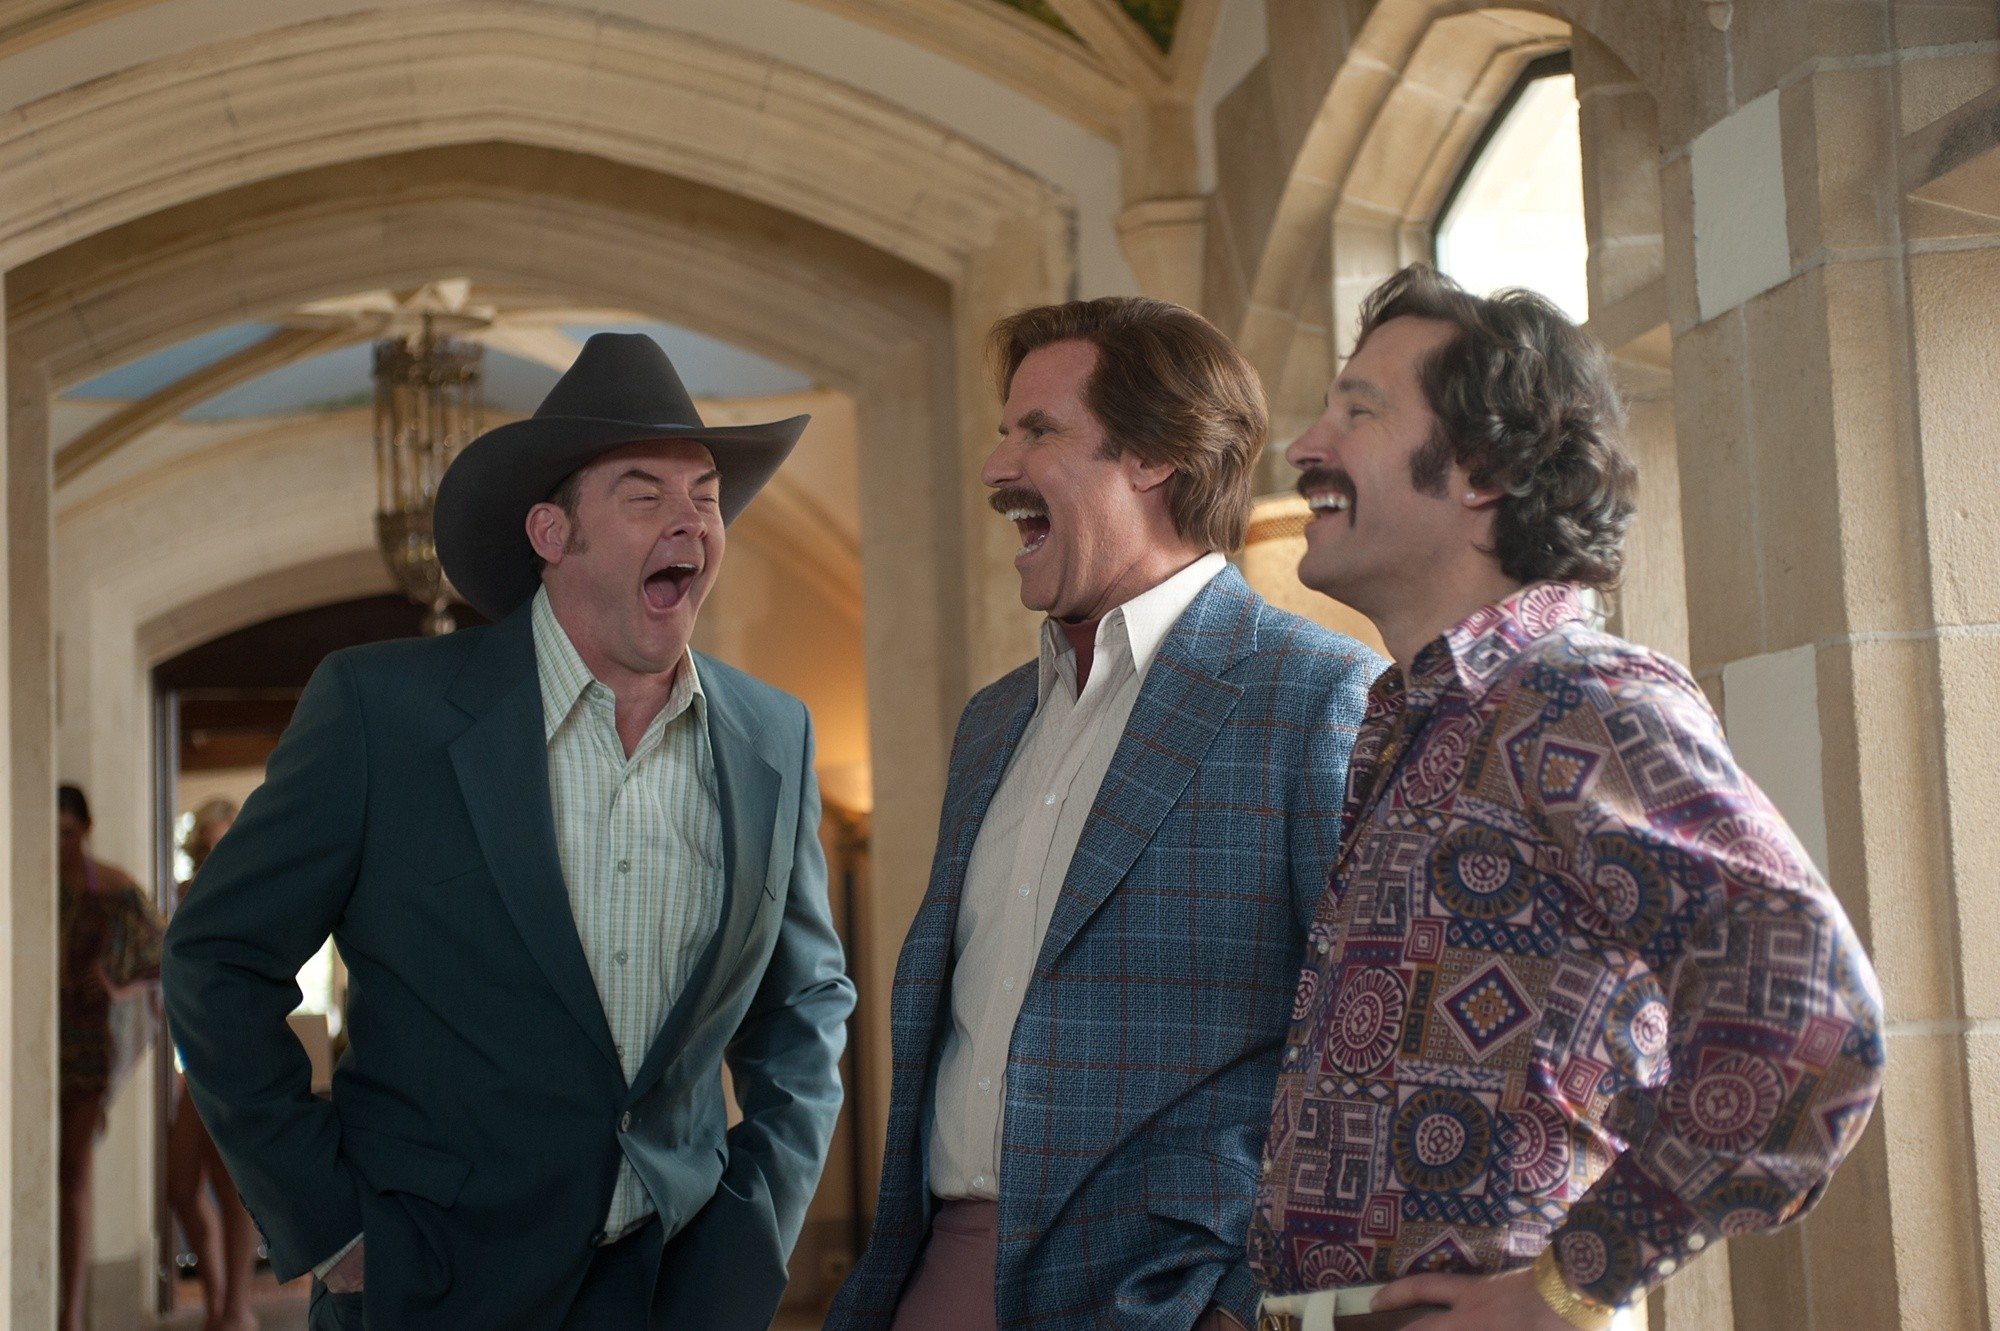 David Koechner, Will Ferrell and Paul Rudd in Paramount Pictures' Anchorman: The Legend Continues (2013)